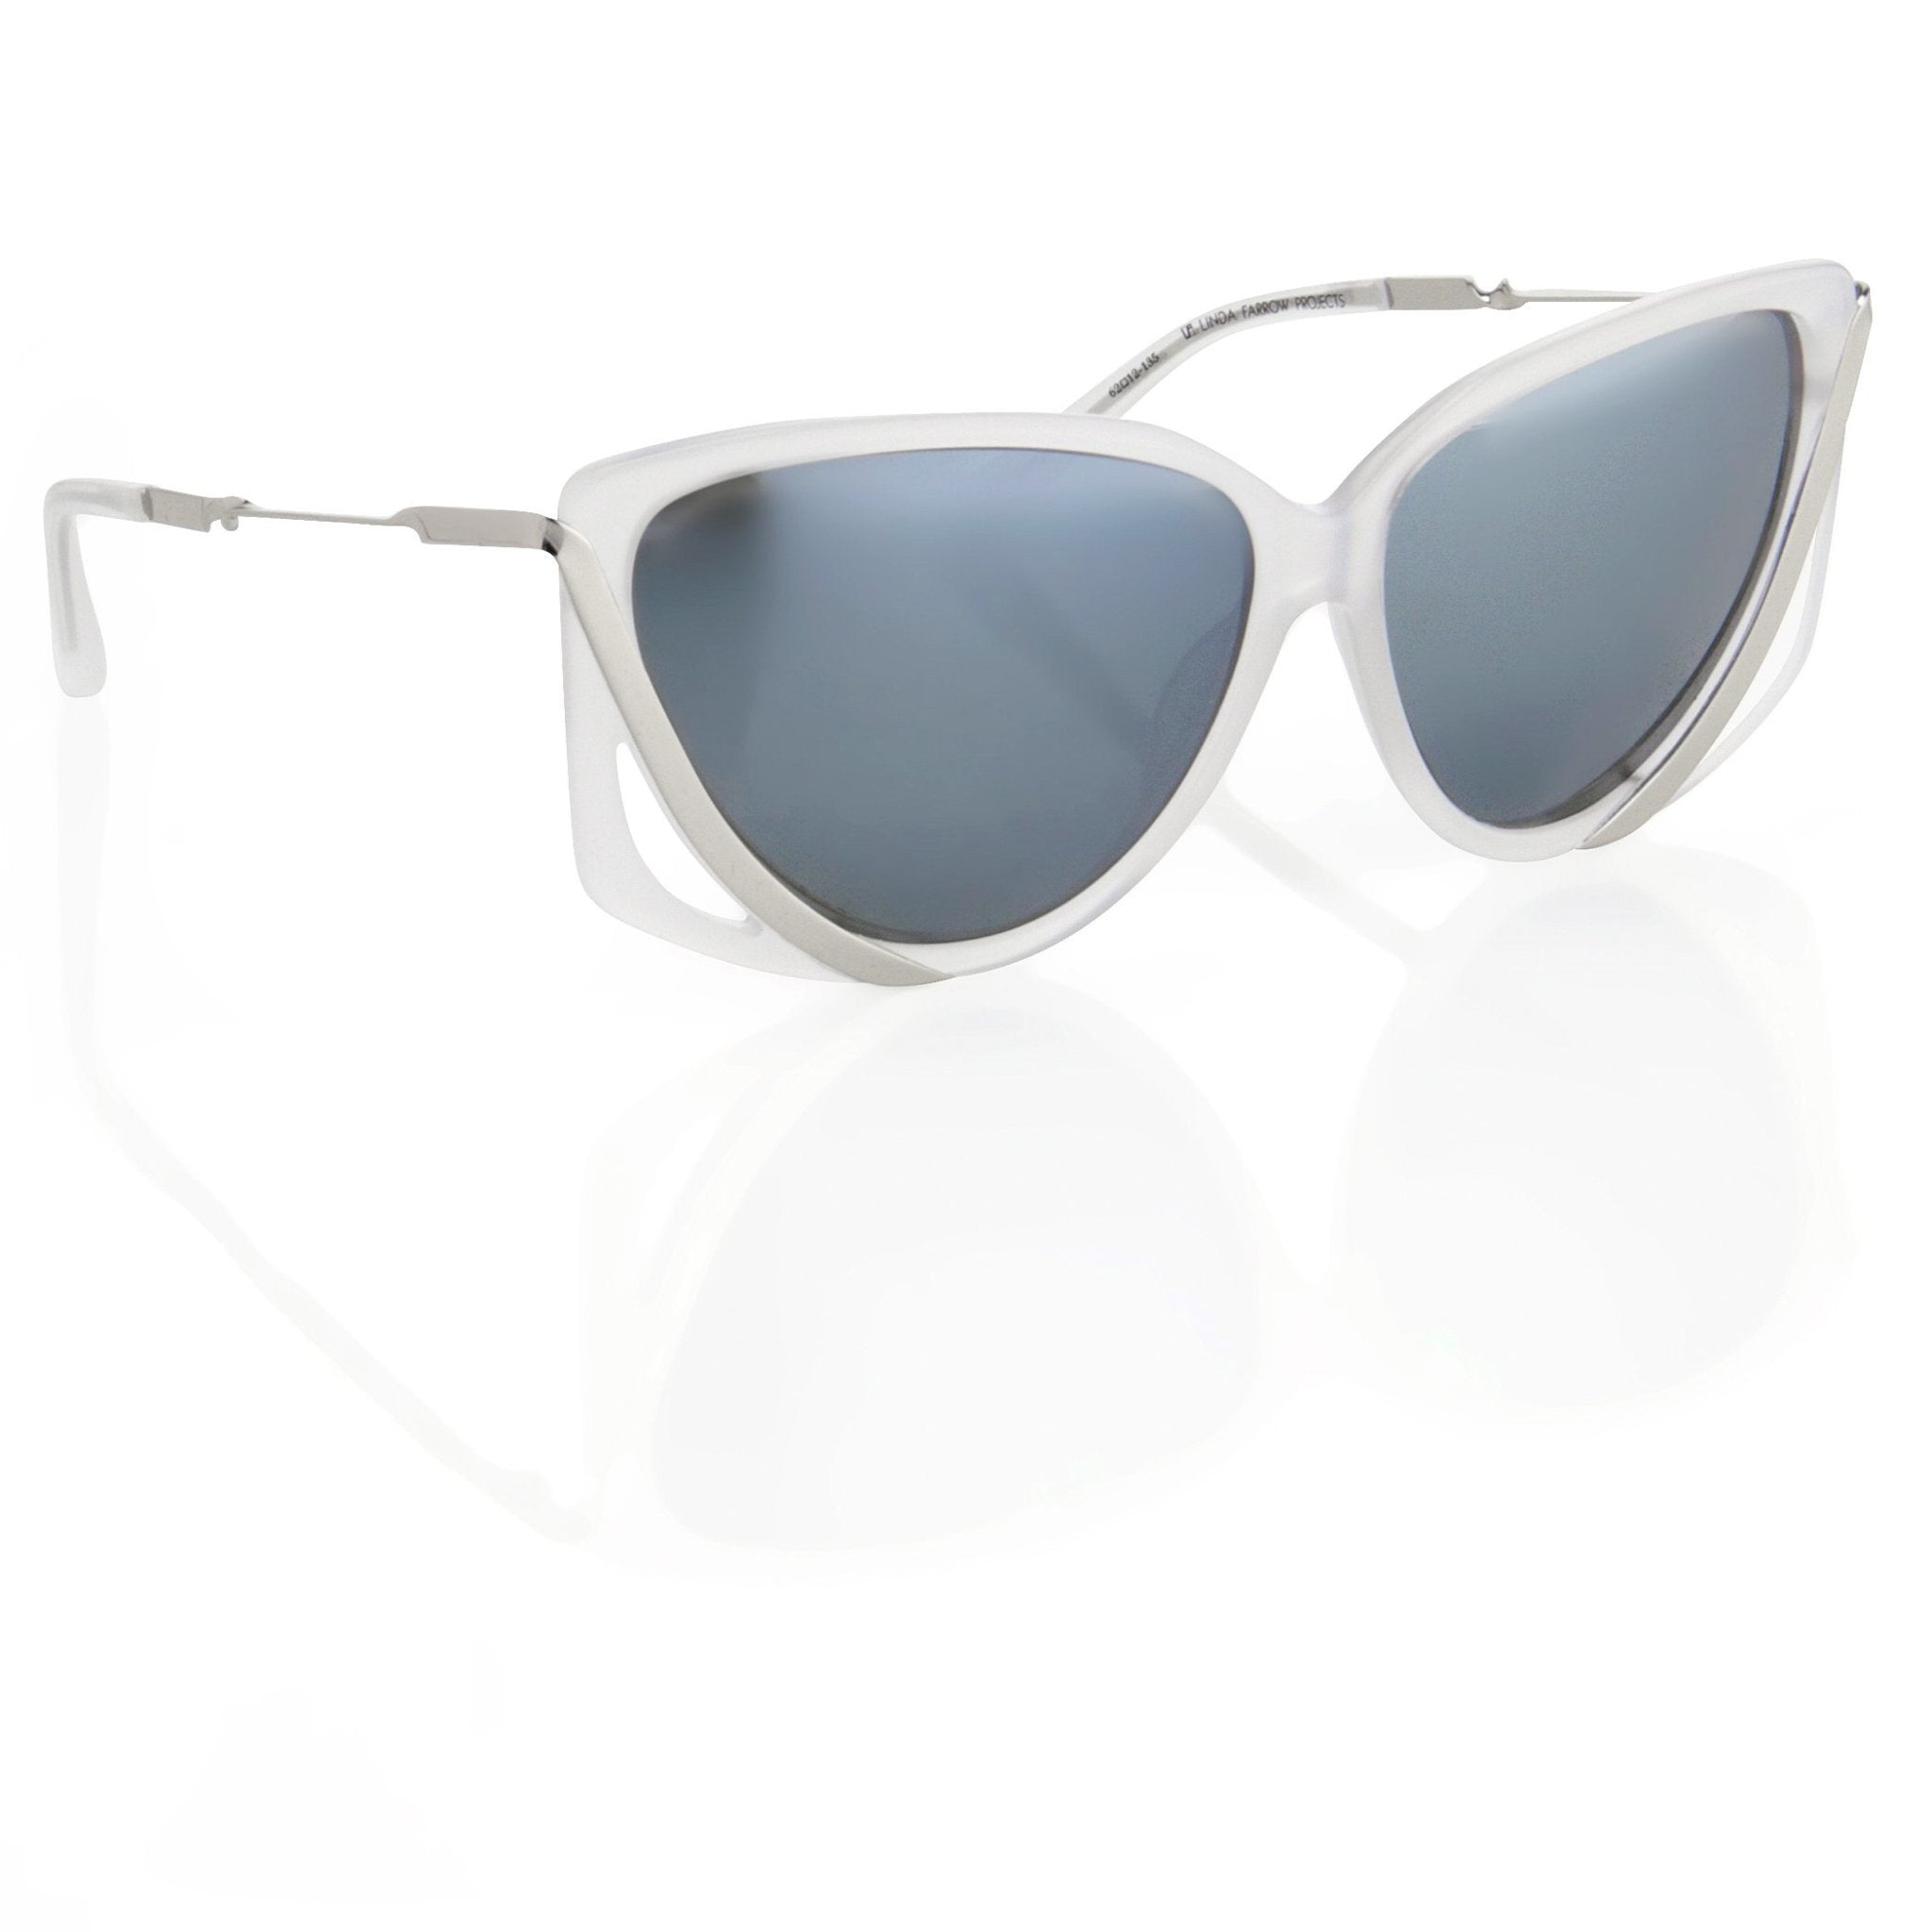 Prabal Gurung Sunglasses Rectangular Smokey White Cut Out With Grey Category 3 Graduated Lenses PG4C2SUN - Watches & Crystals